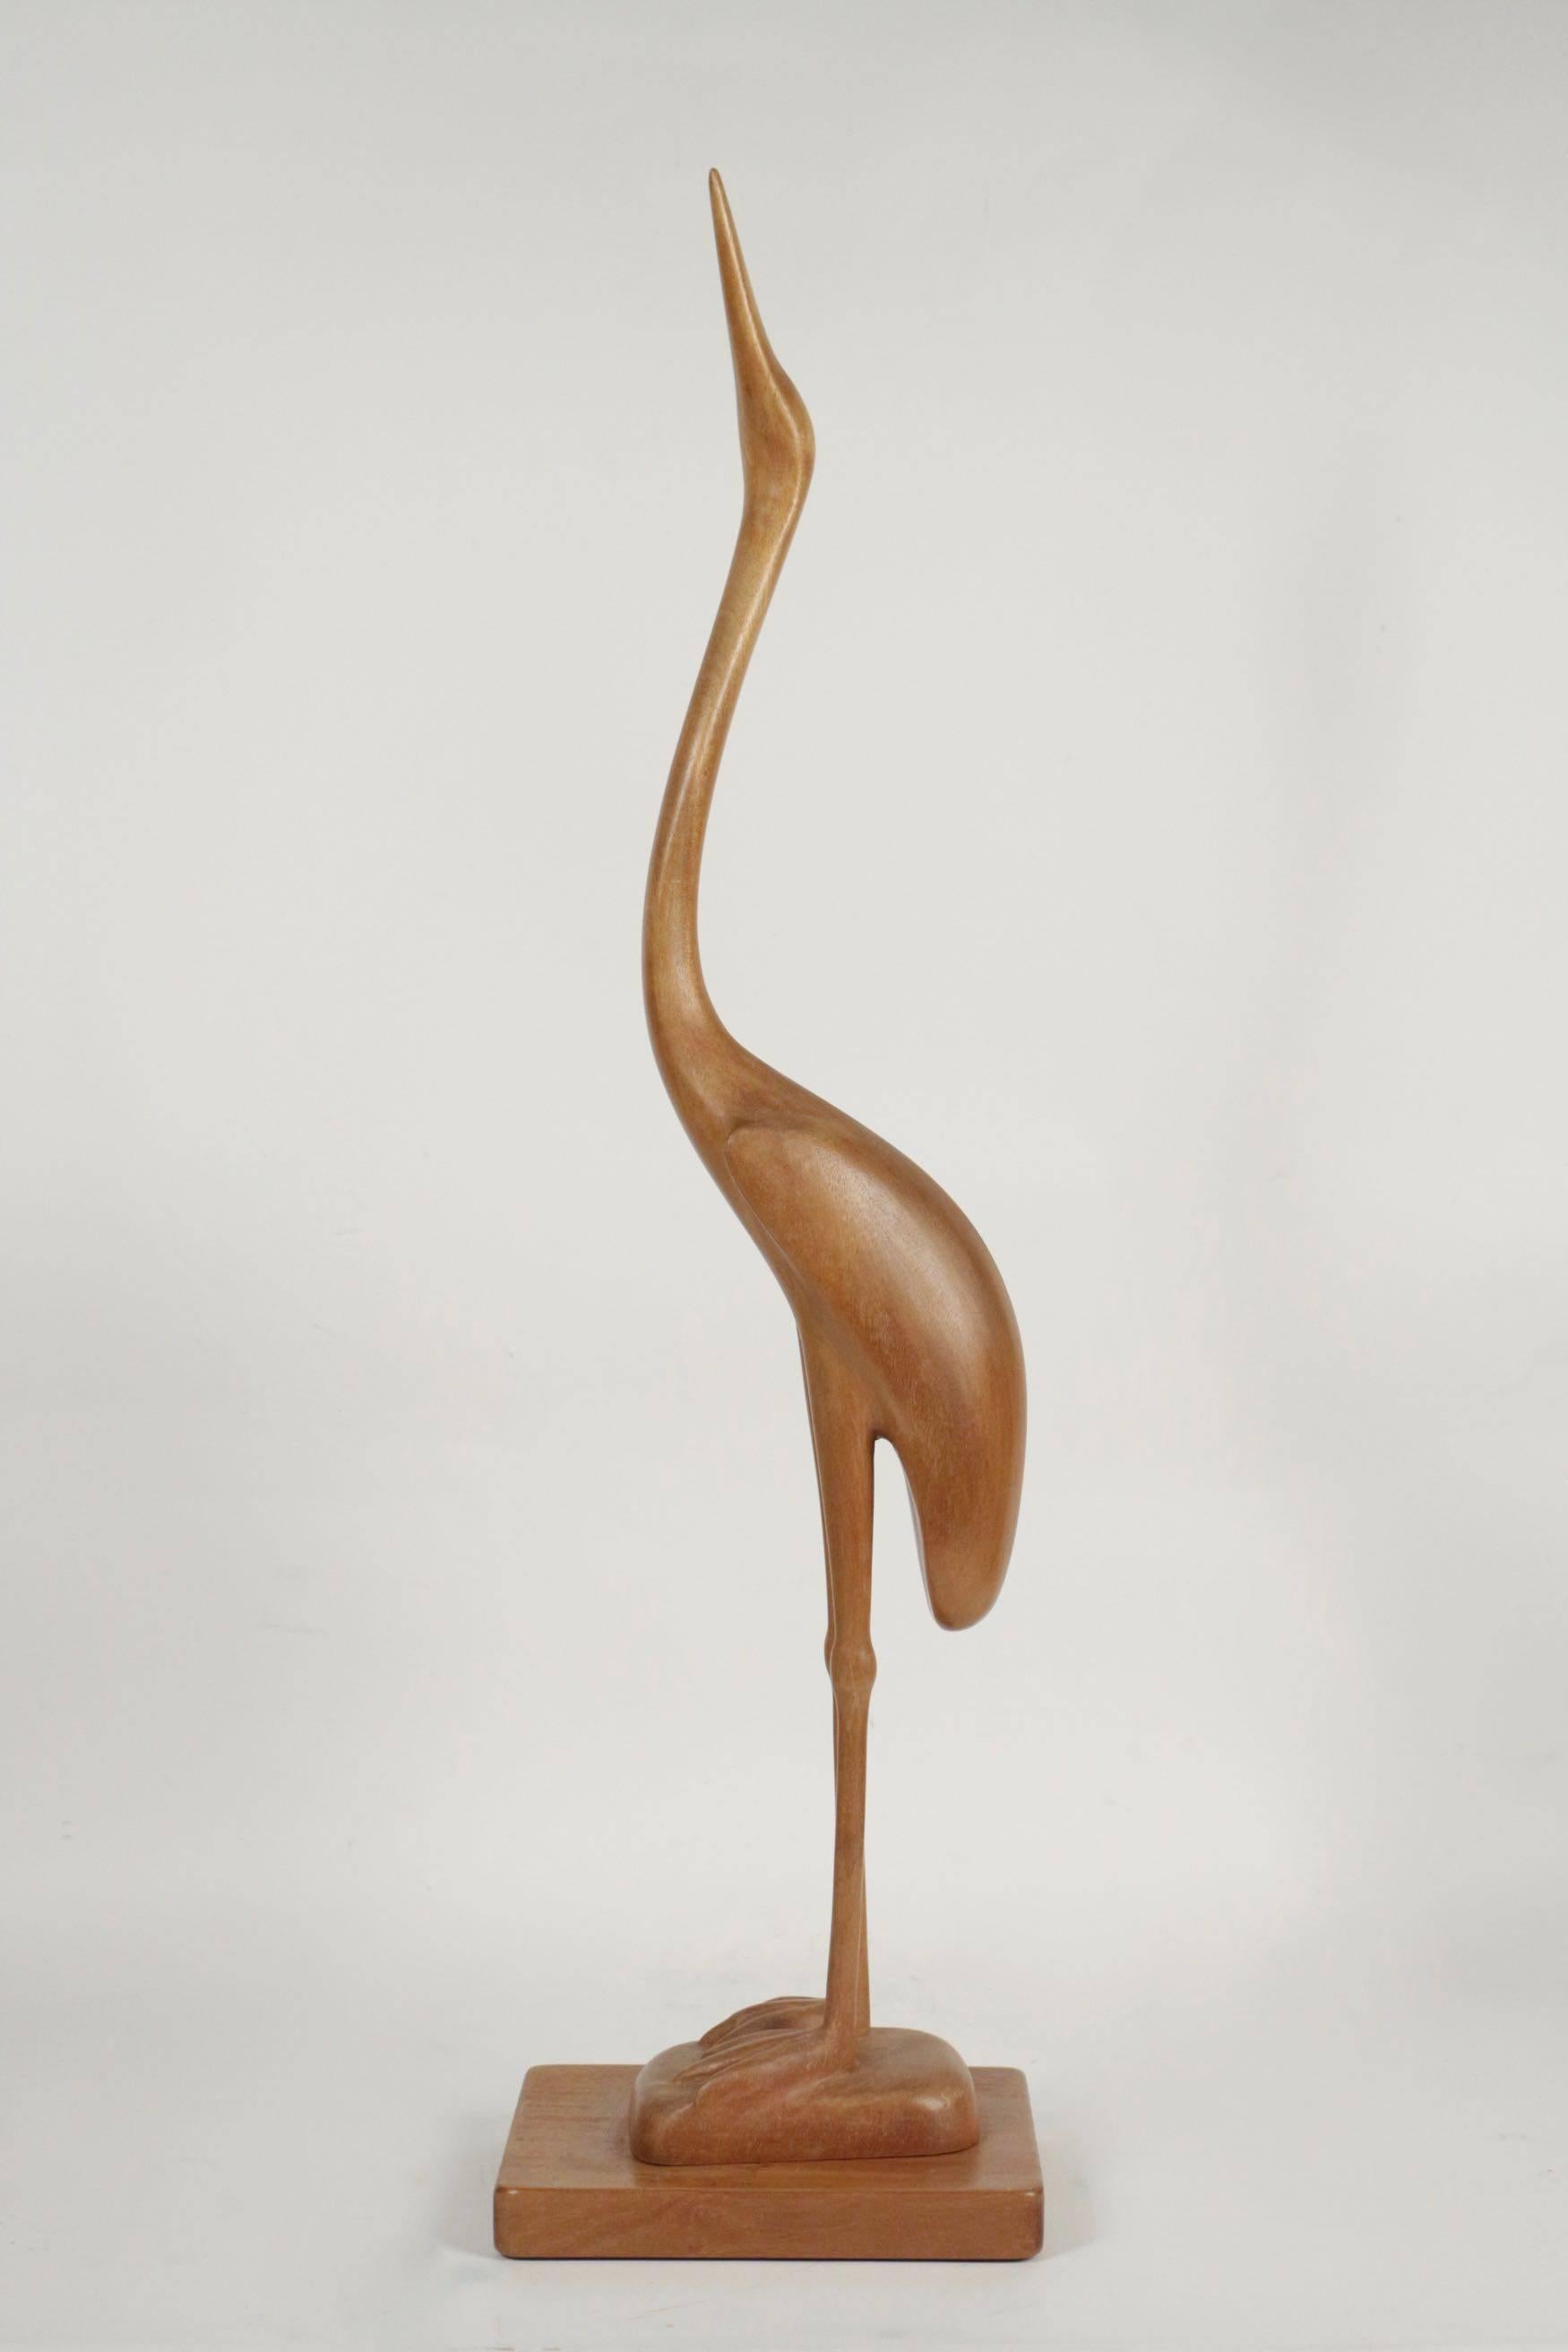 Unique Heron sculpture by Sakari Pykälä, 1962.
Signed by the artist.

